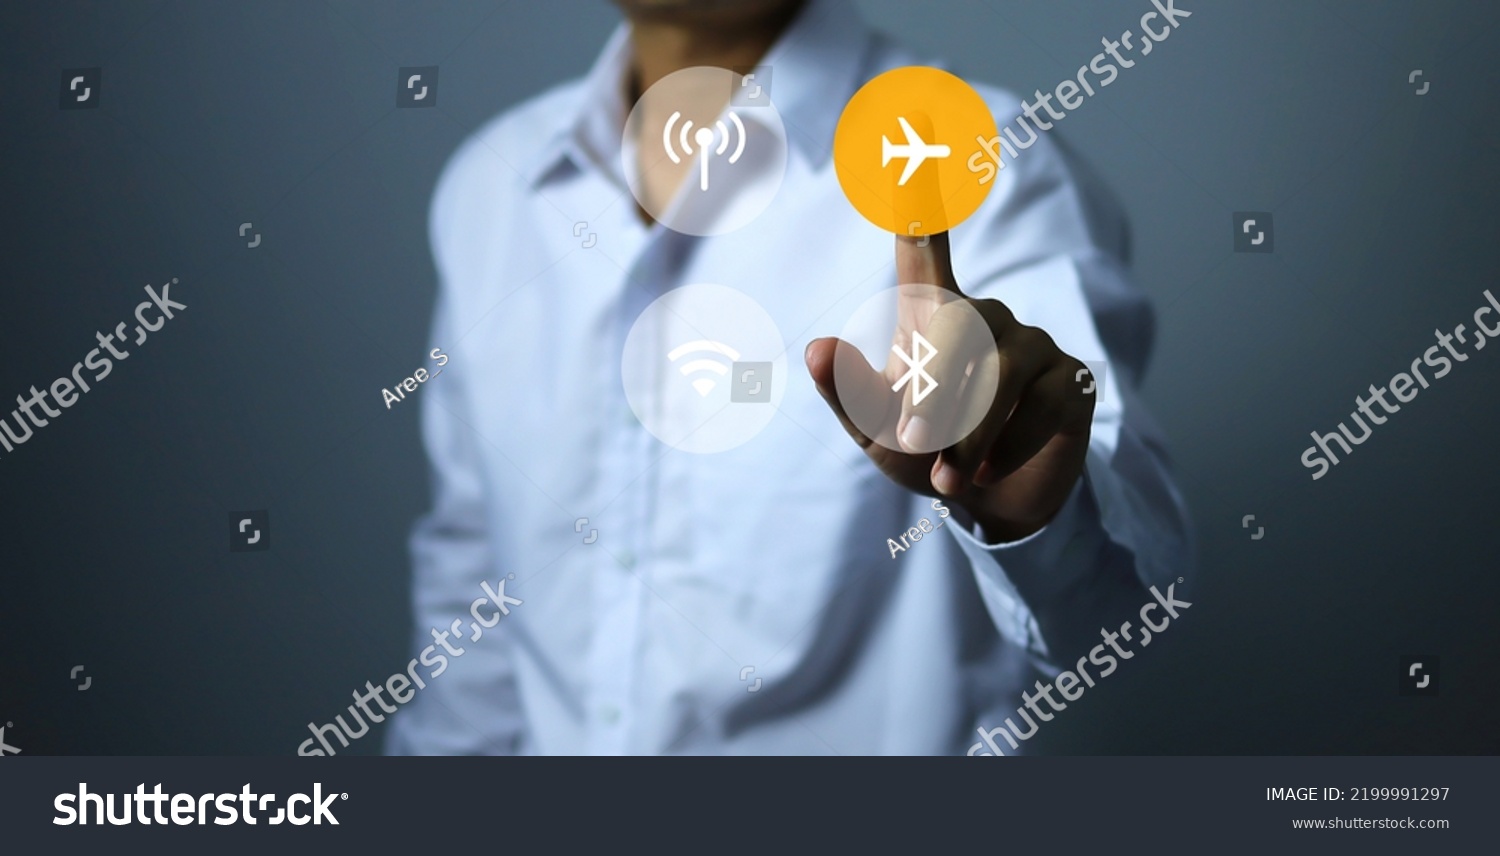 The man in the white shirt presses the air plane mode icon, indicating that he does not want to contact the outside world, disconnect or do not disturb. #2199991297